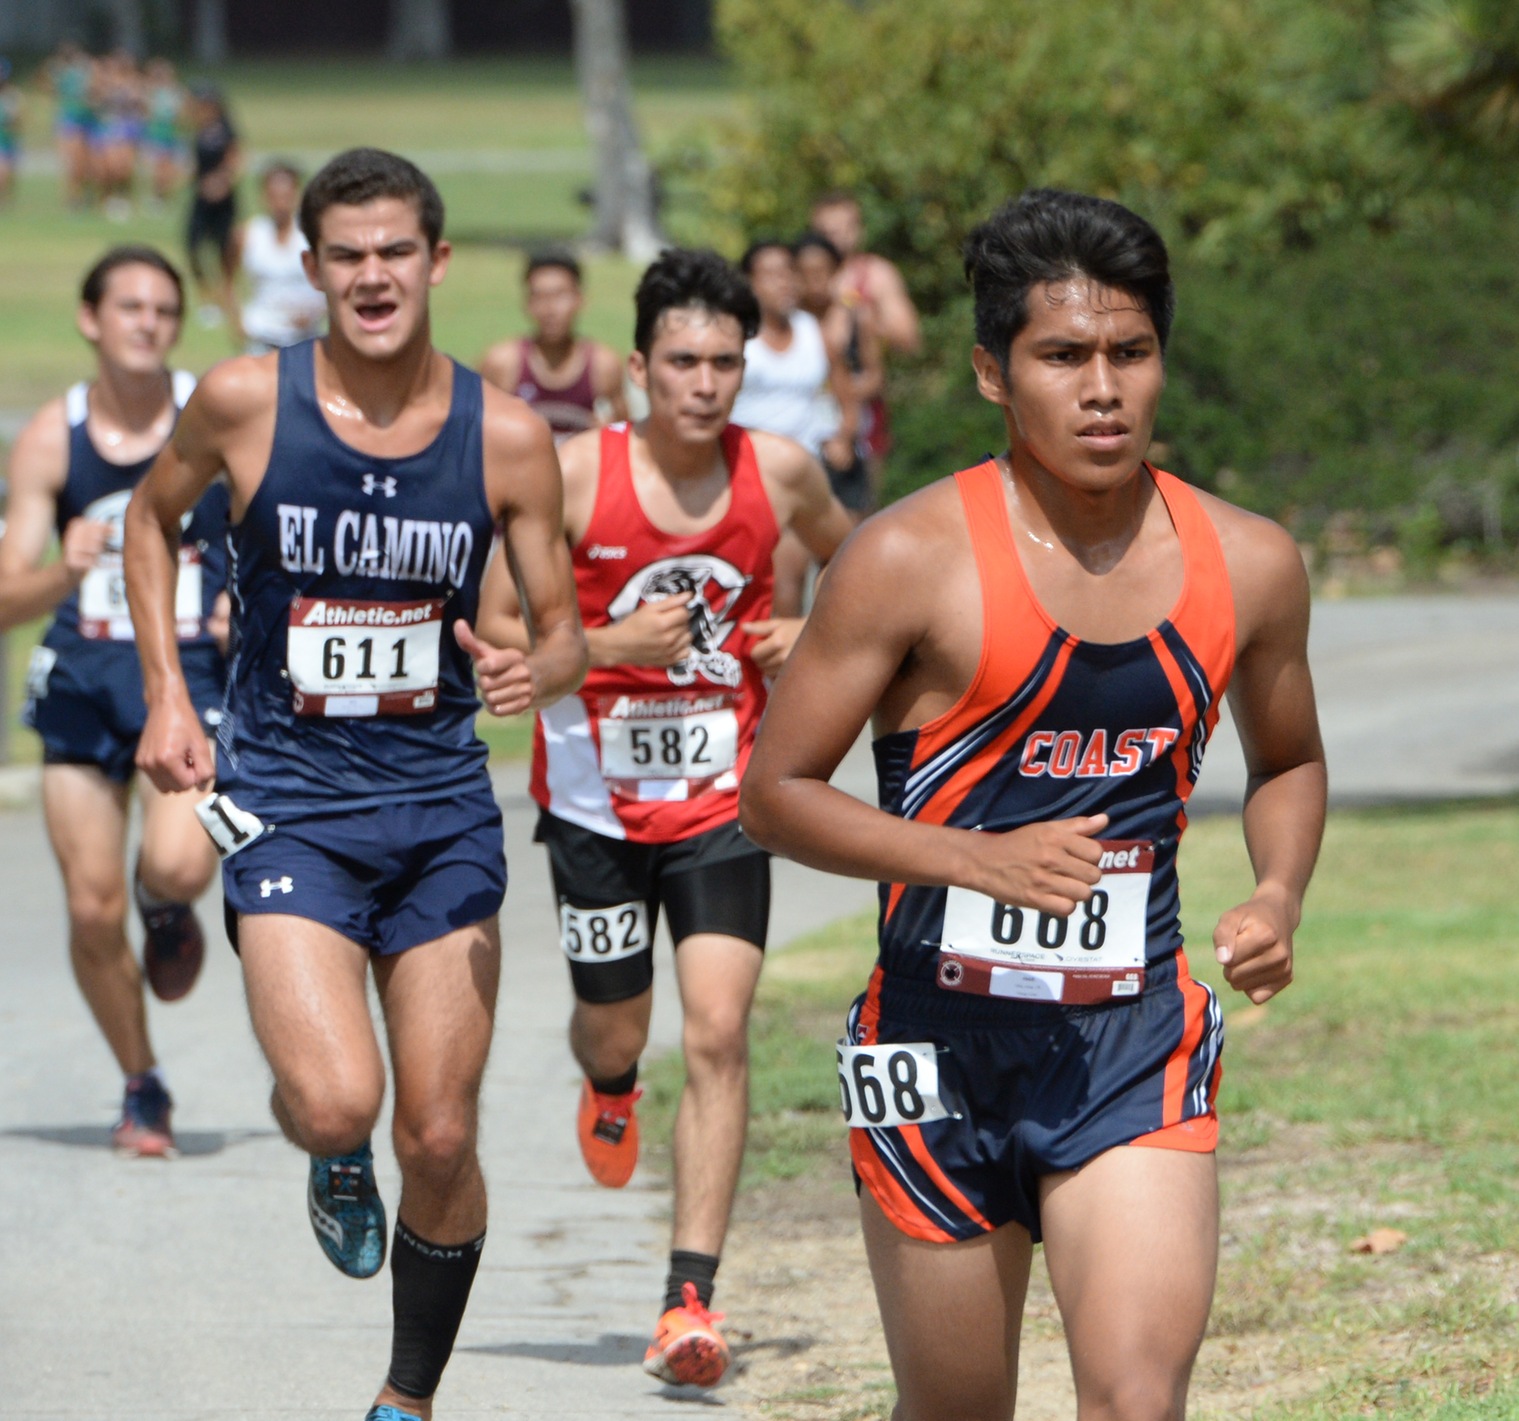 Pirates take fourth overall at OEC Cross Country Championships